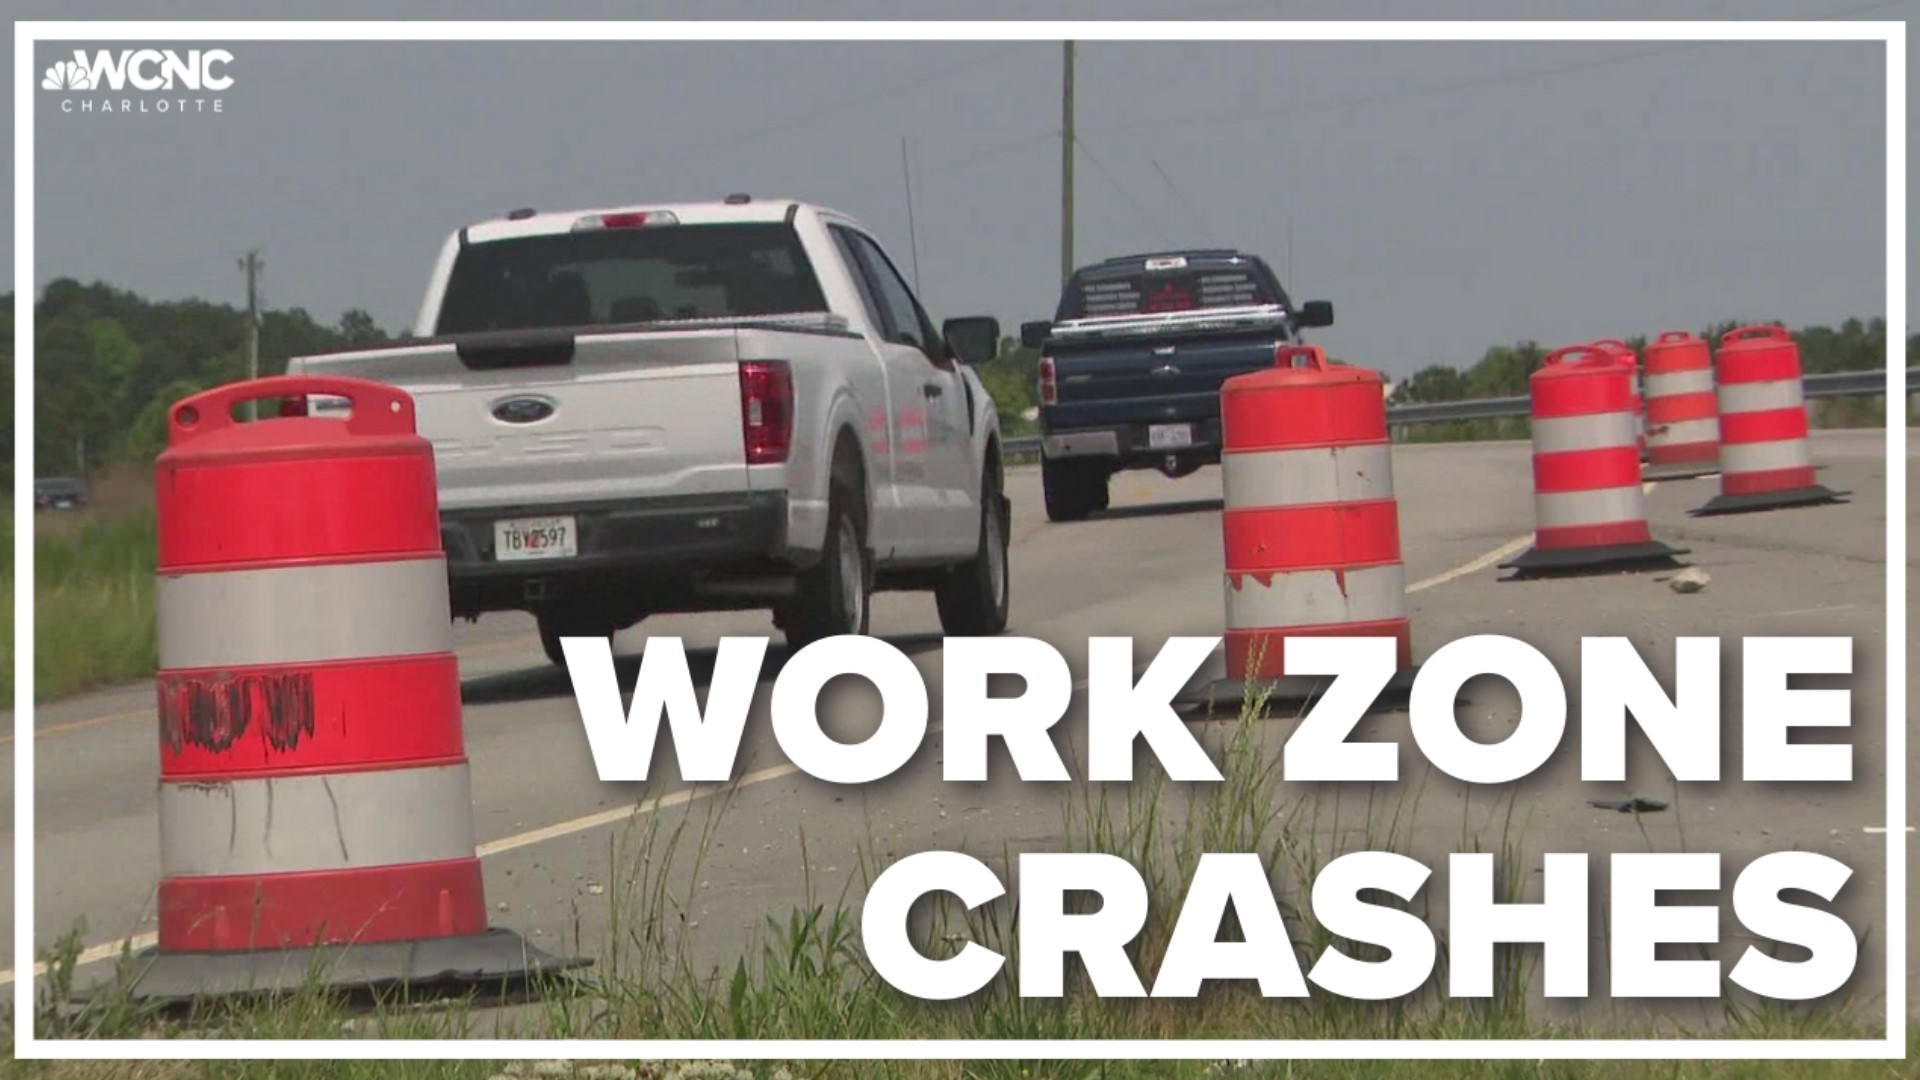 Nine people died in work zone crashes in the first five months of this year, which is a slight increase from this time last year.